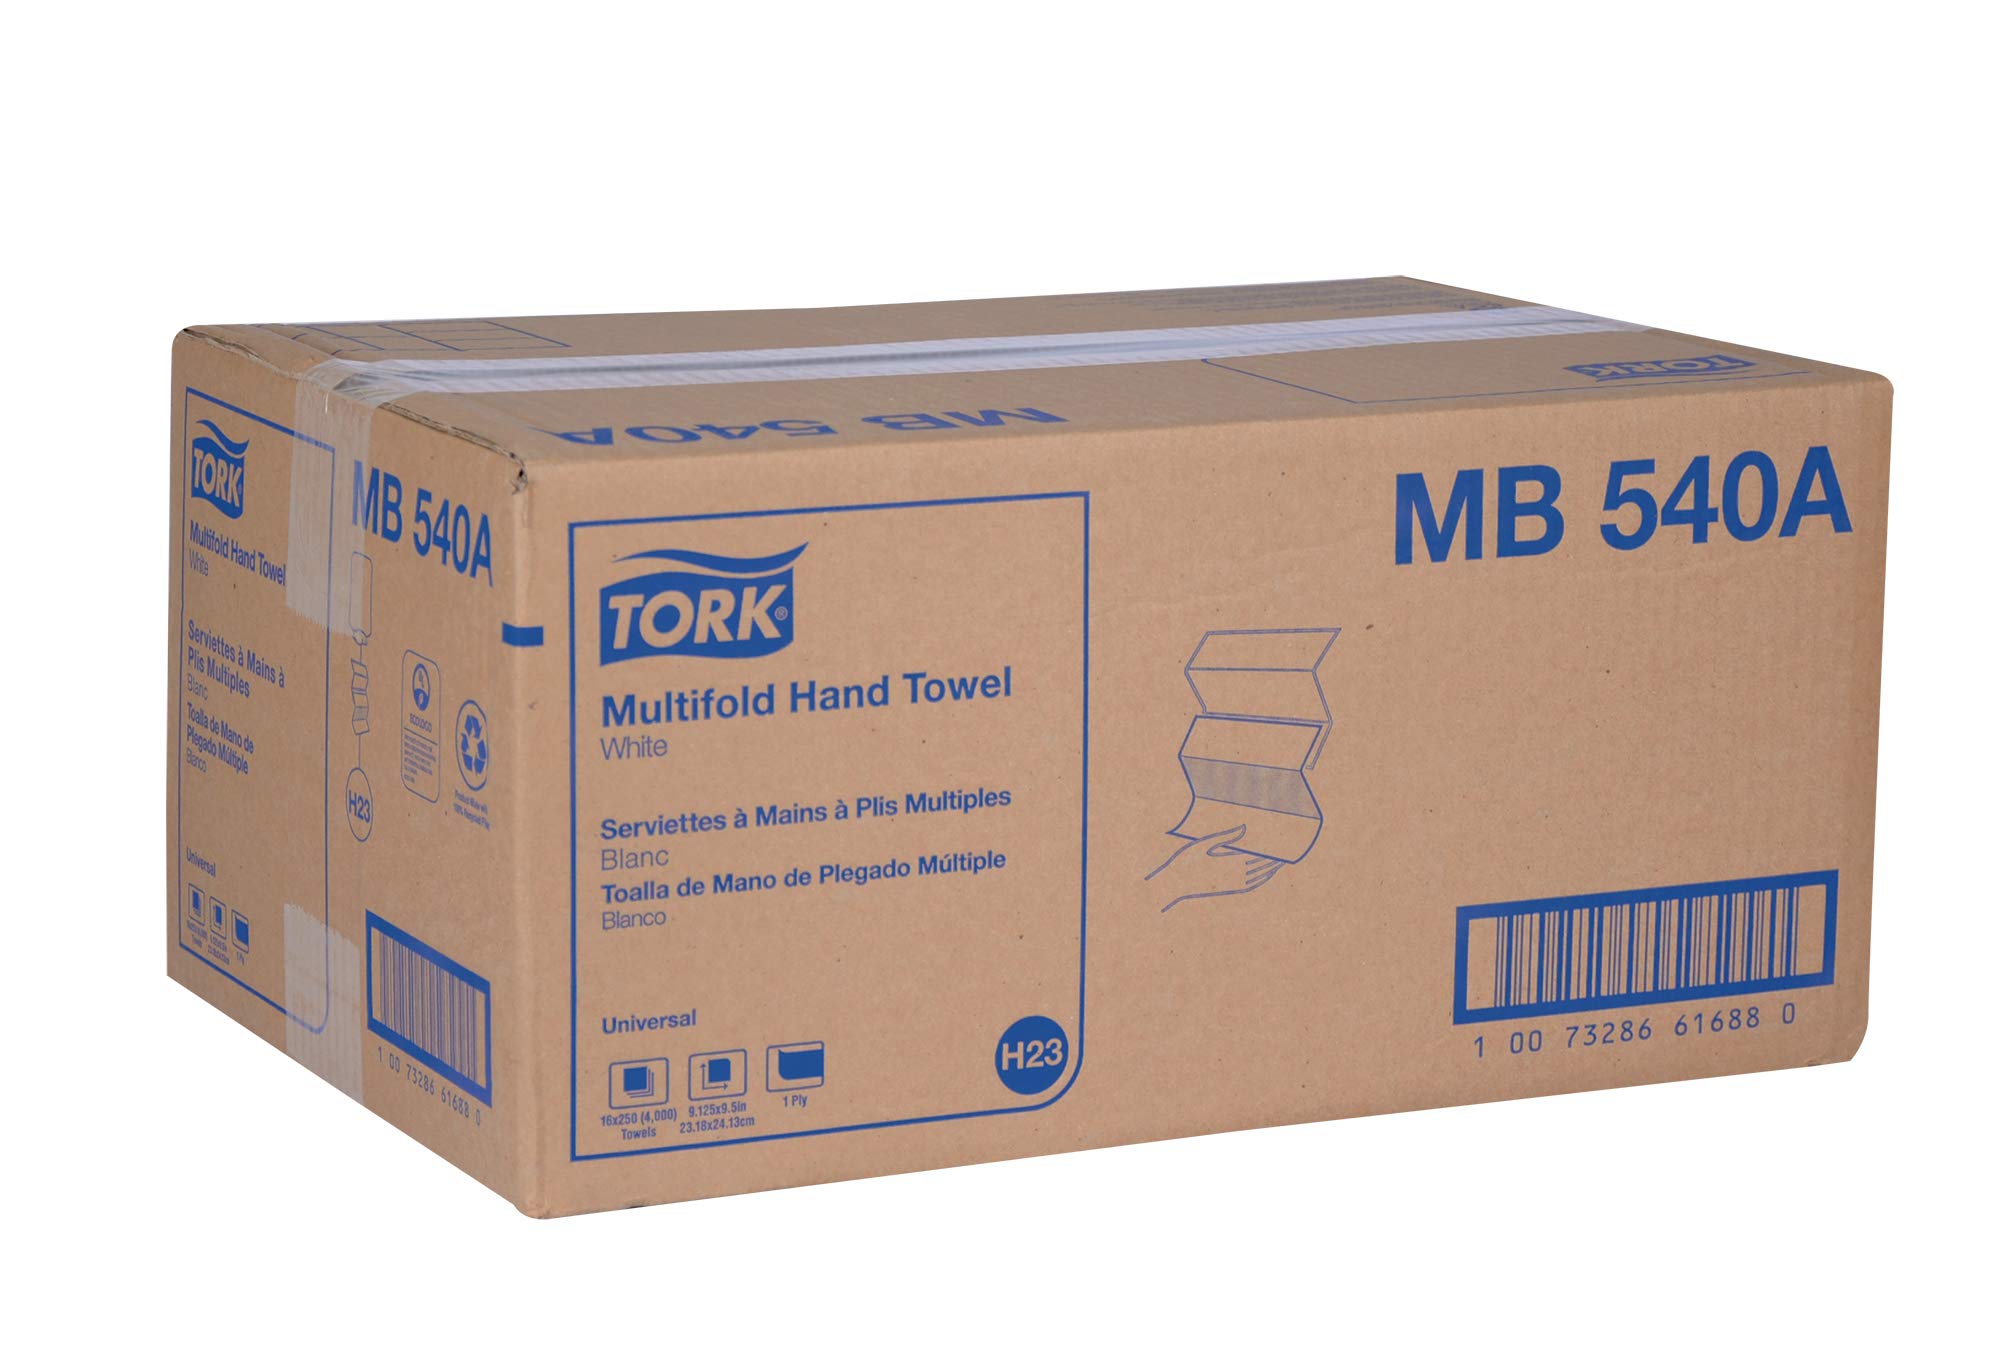 Tork Multifold Hand Towel White H2, Universal, 100% Recycled Fibers, 16 x 250 Towels, MB540A